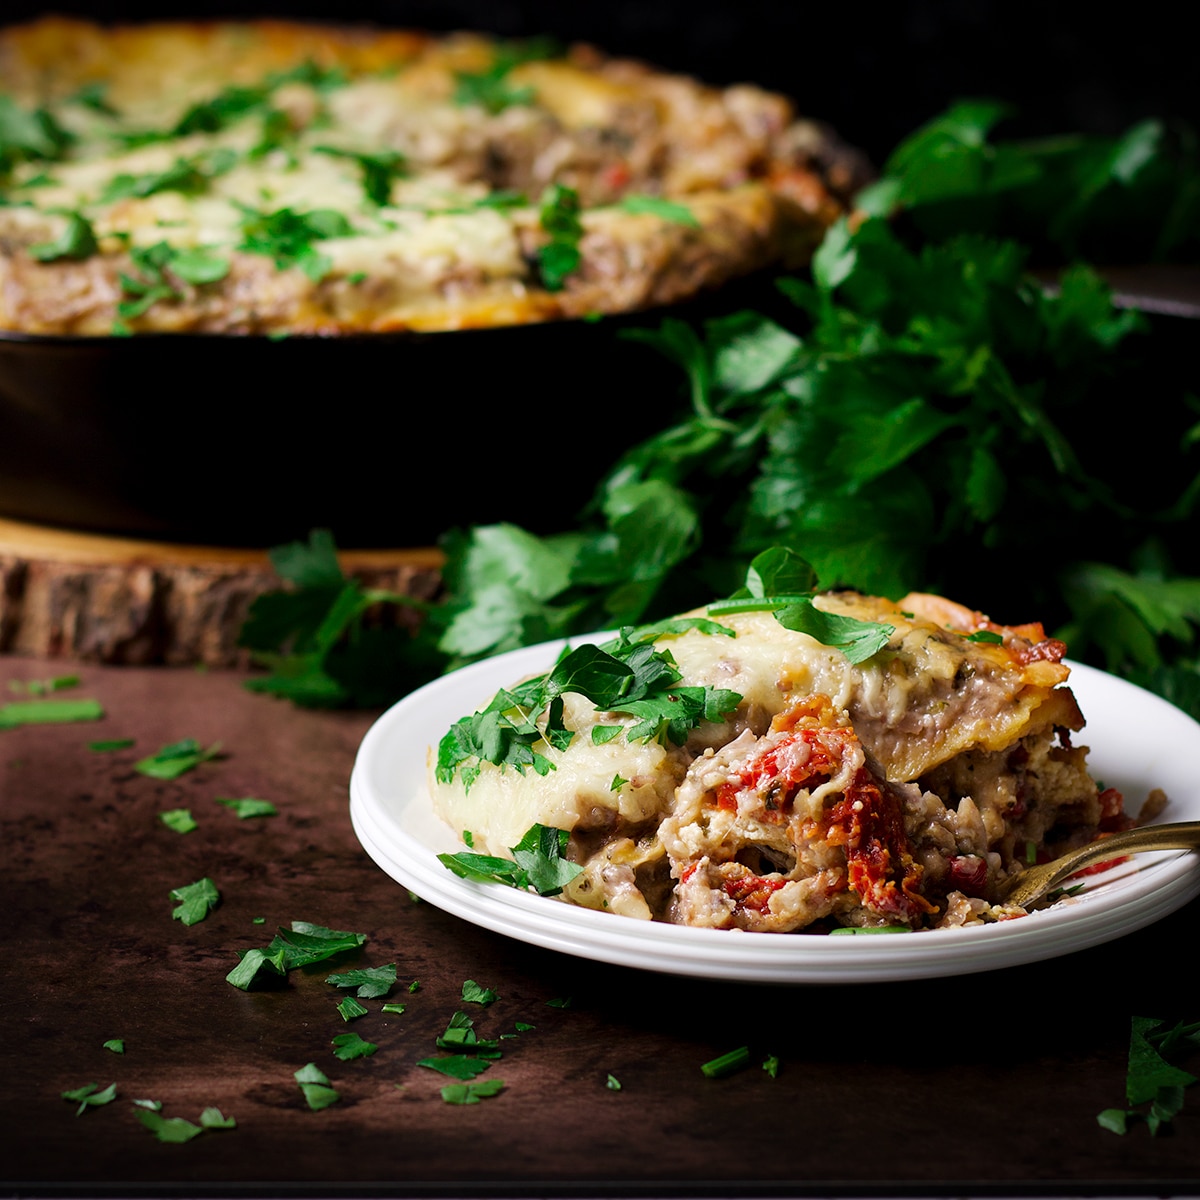 A plate of vegetarian lasagna resting on a table next to skillet baked vegetable lasagna.